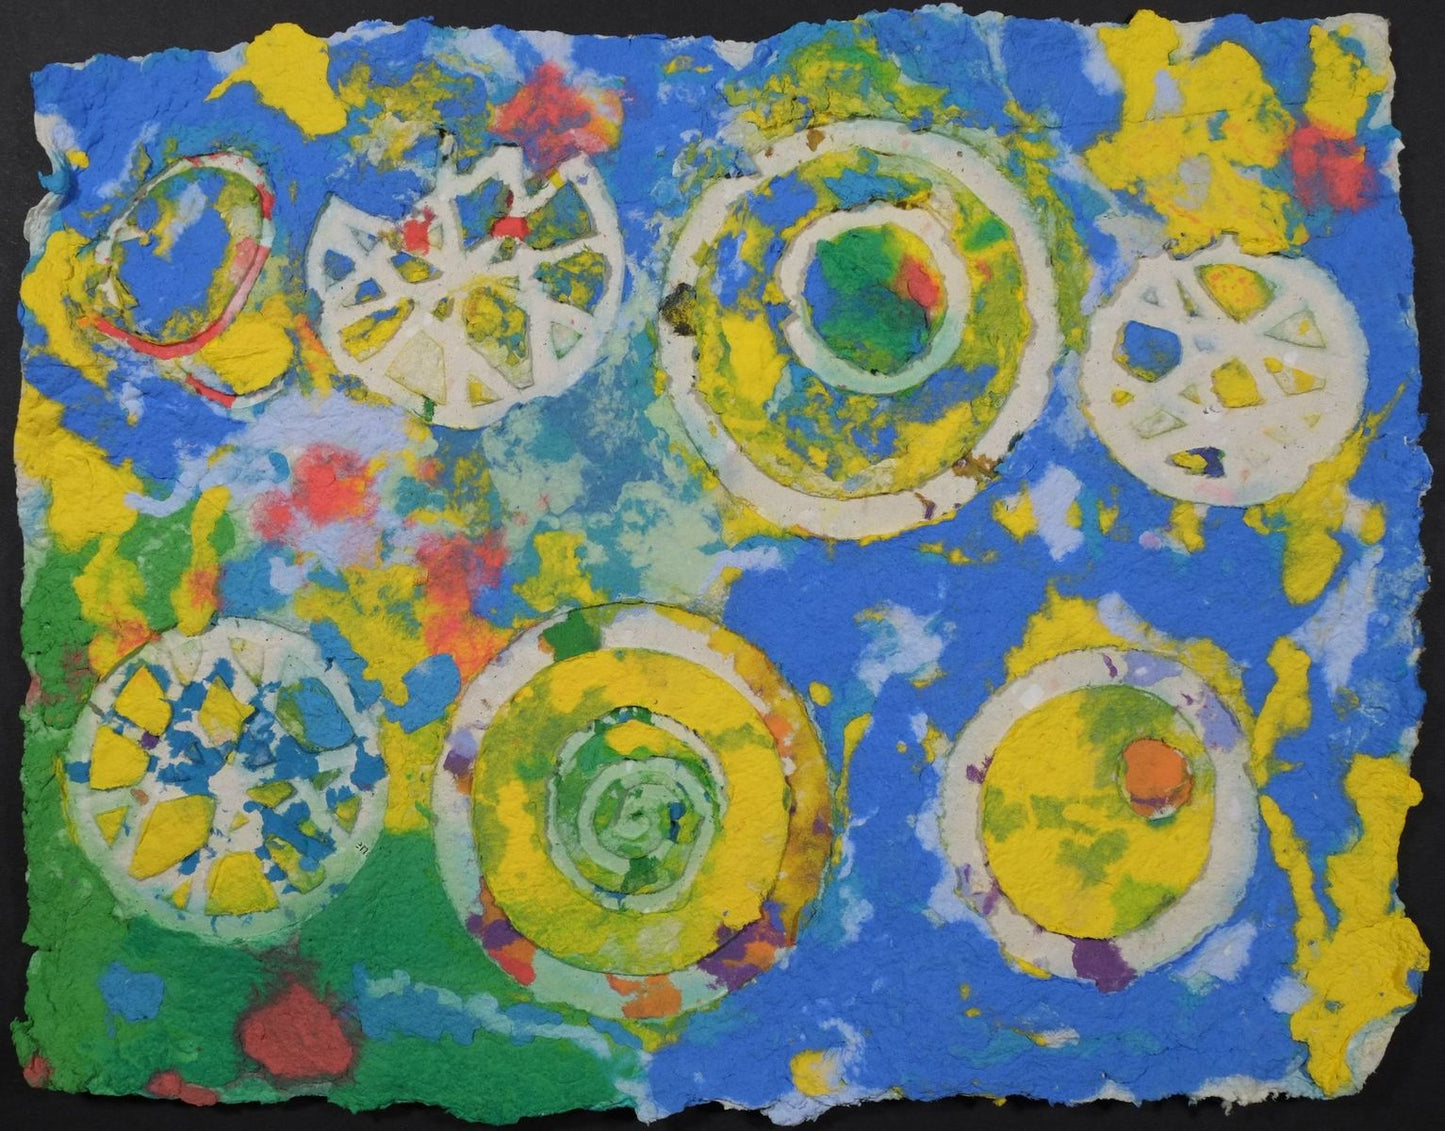 Pigment on recycled paper artwork with white circles, swirls and wagon wheels against a background of blue, yellow, green and red